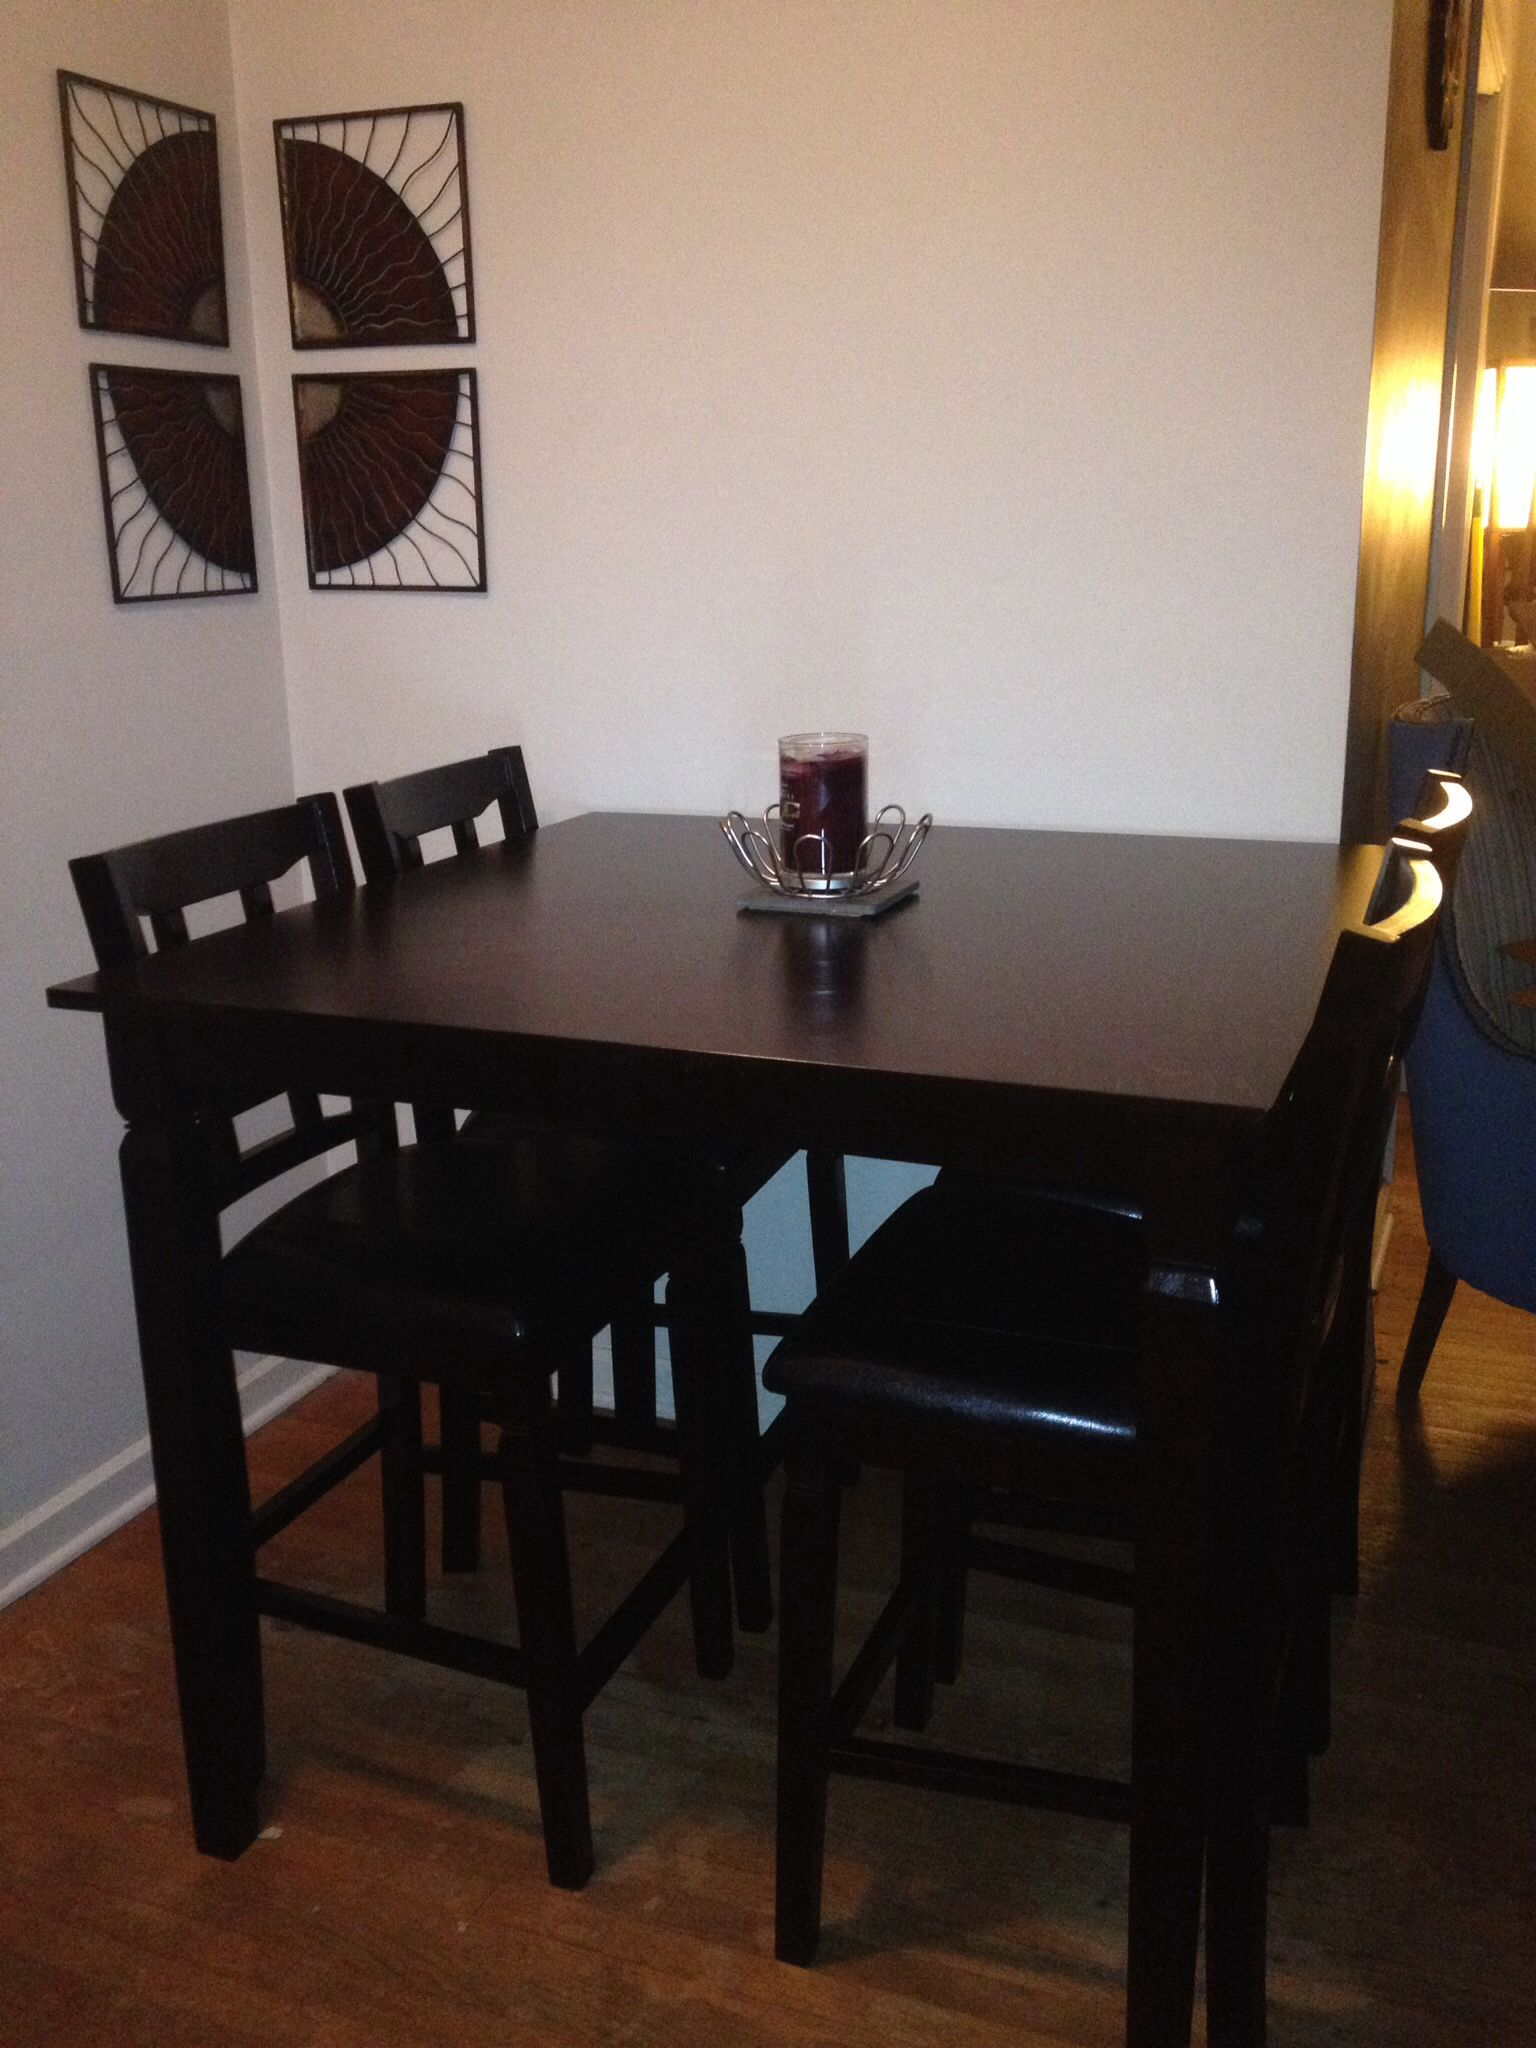 Espresso Pub Table And Chairs From Big Lots Works Great In within proportions 1536 X 2048